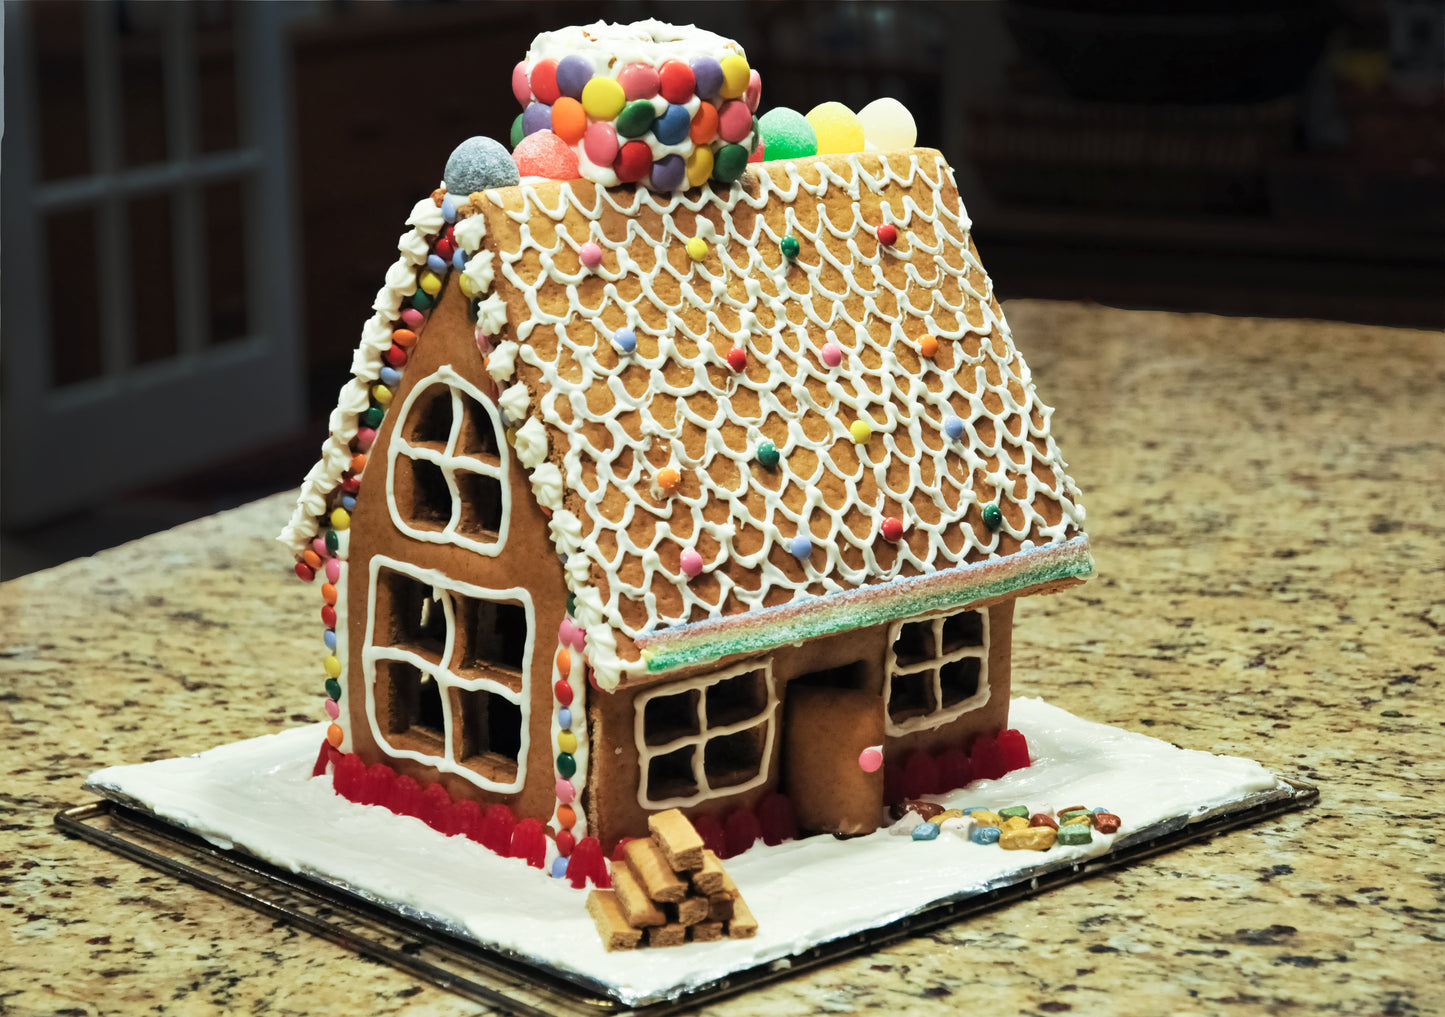 Easy Gingerbread House Cookie Cutter Kit For Kids and Adults. Work As Clay Cutters, Fondant Cutters Too!